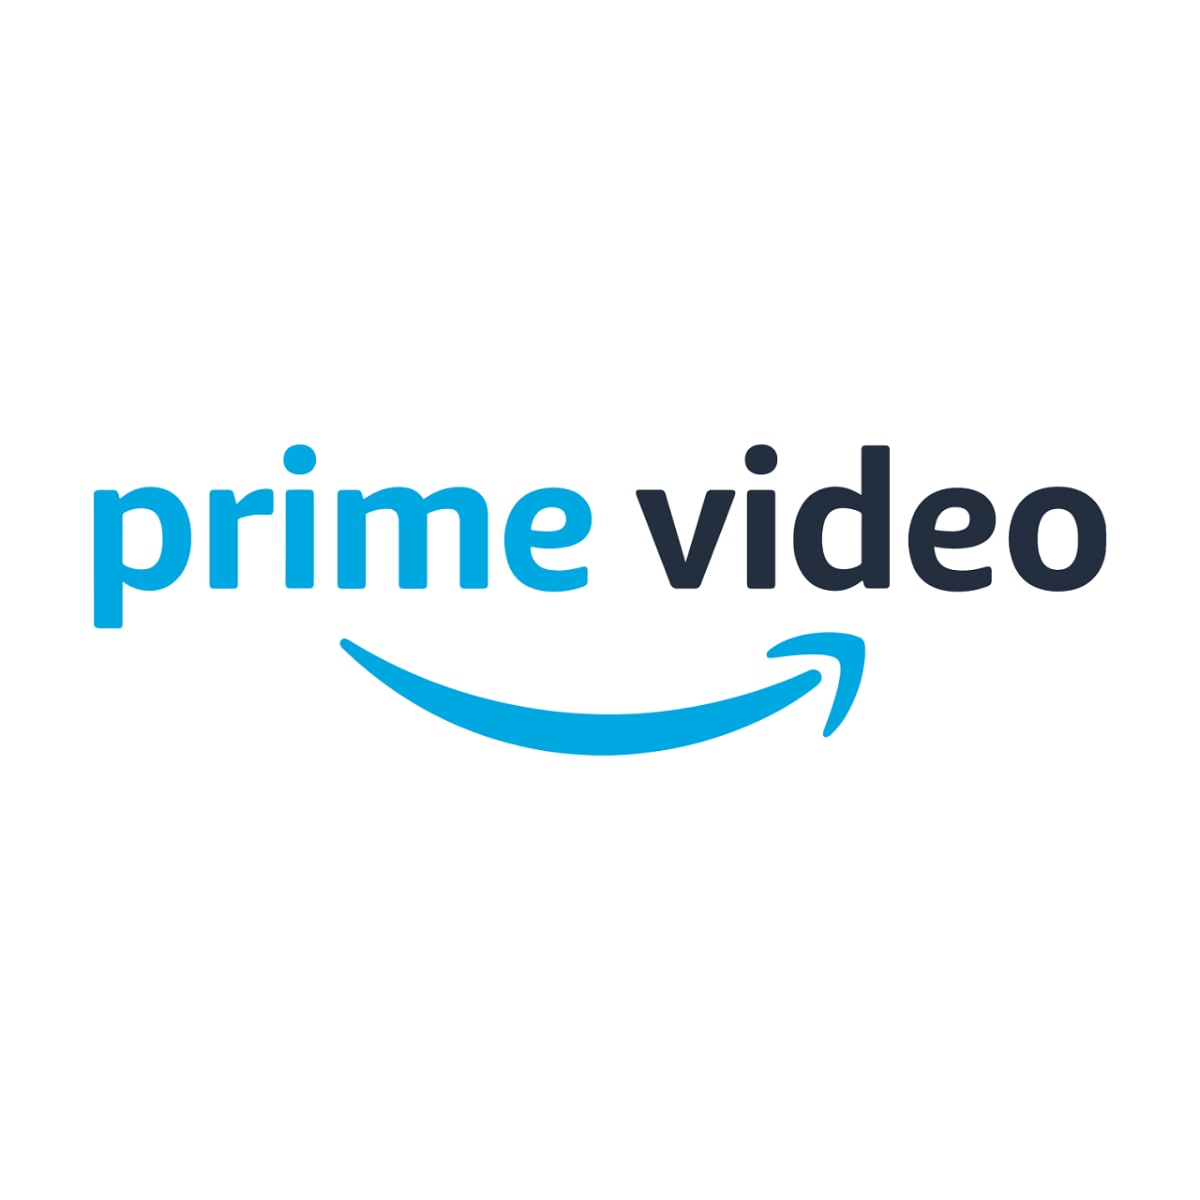 Amazon Prime Video Mobile Edition Live In India Before Rest Of The World Airtel Users Get First Access